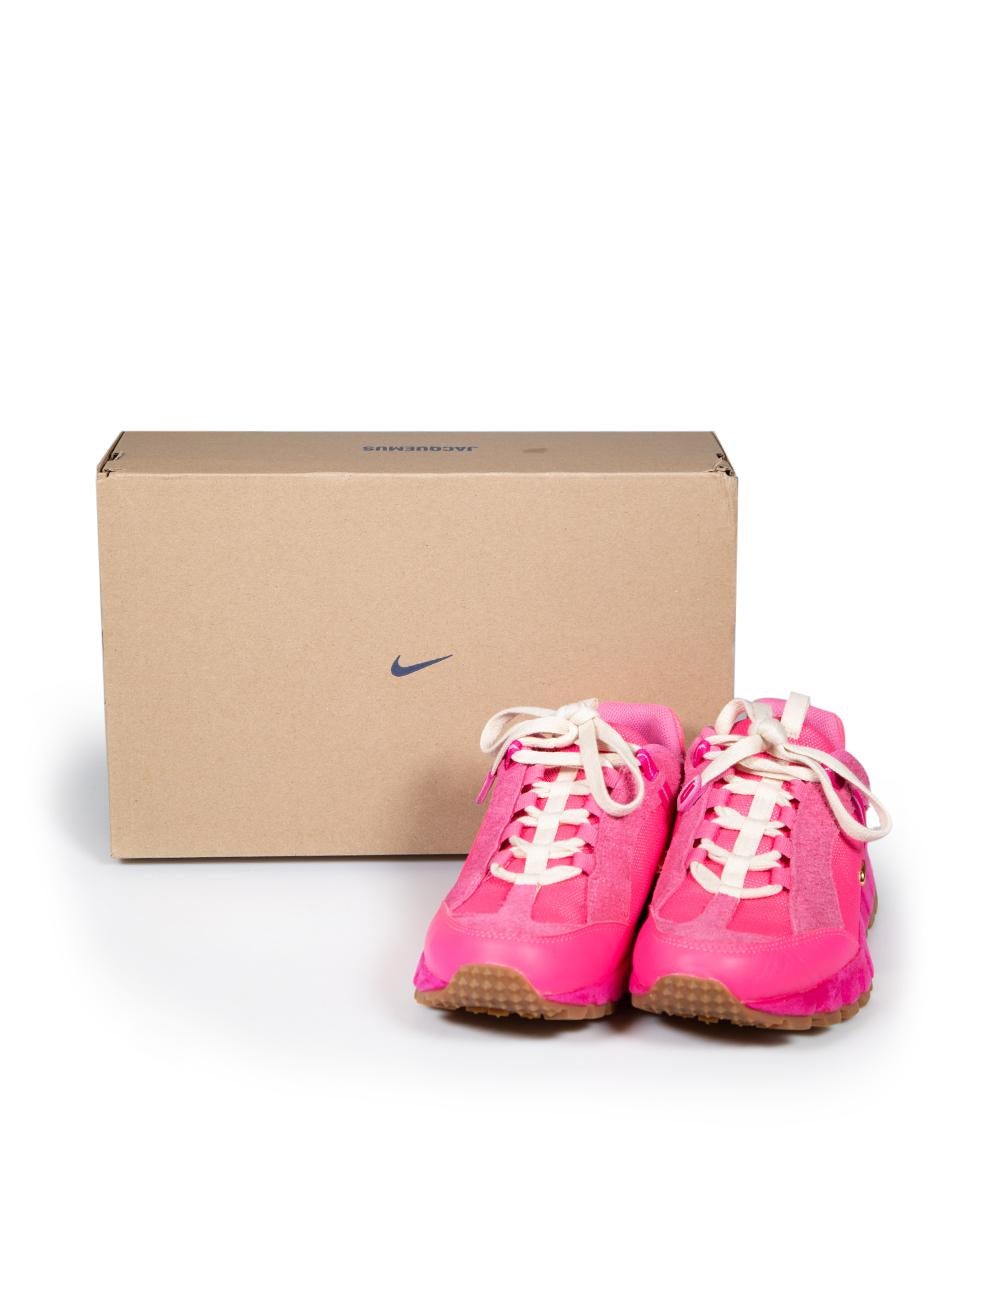 Jacquemus Jacquemus x Nike Pink Flash Air Humara Trainers Size US 8 For Sale 4